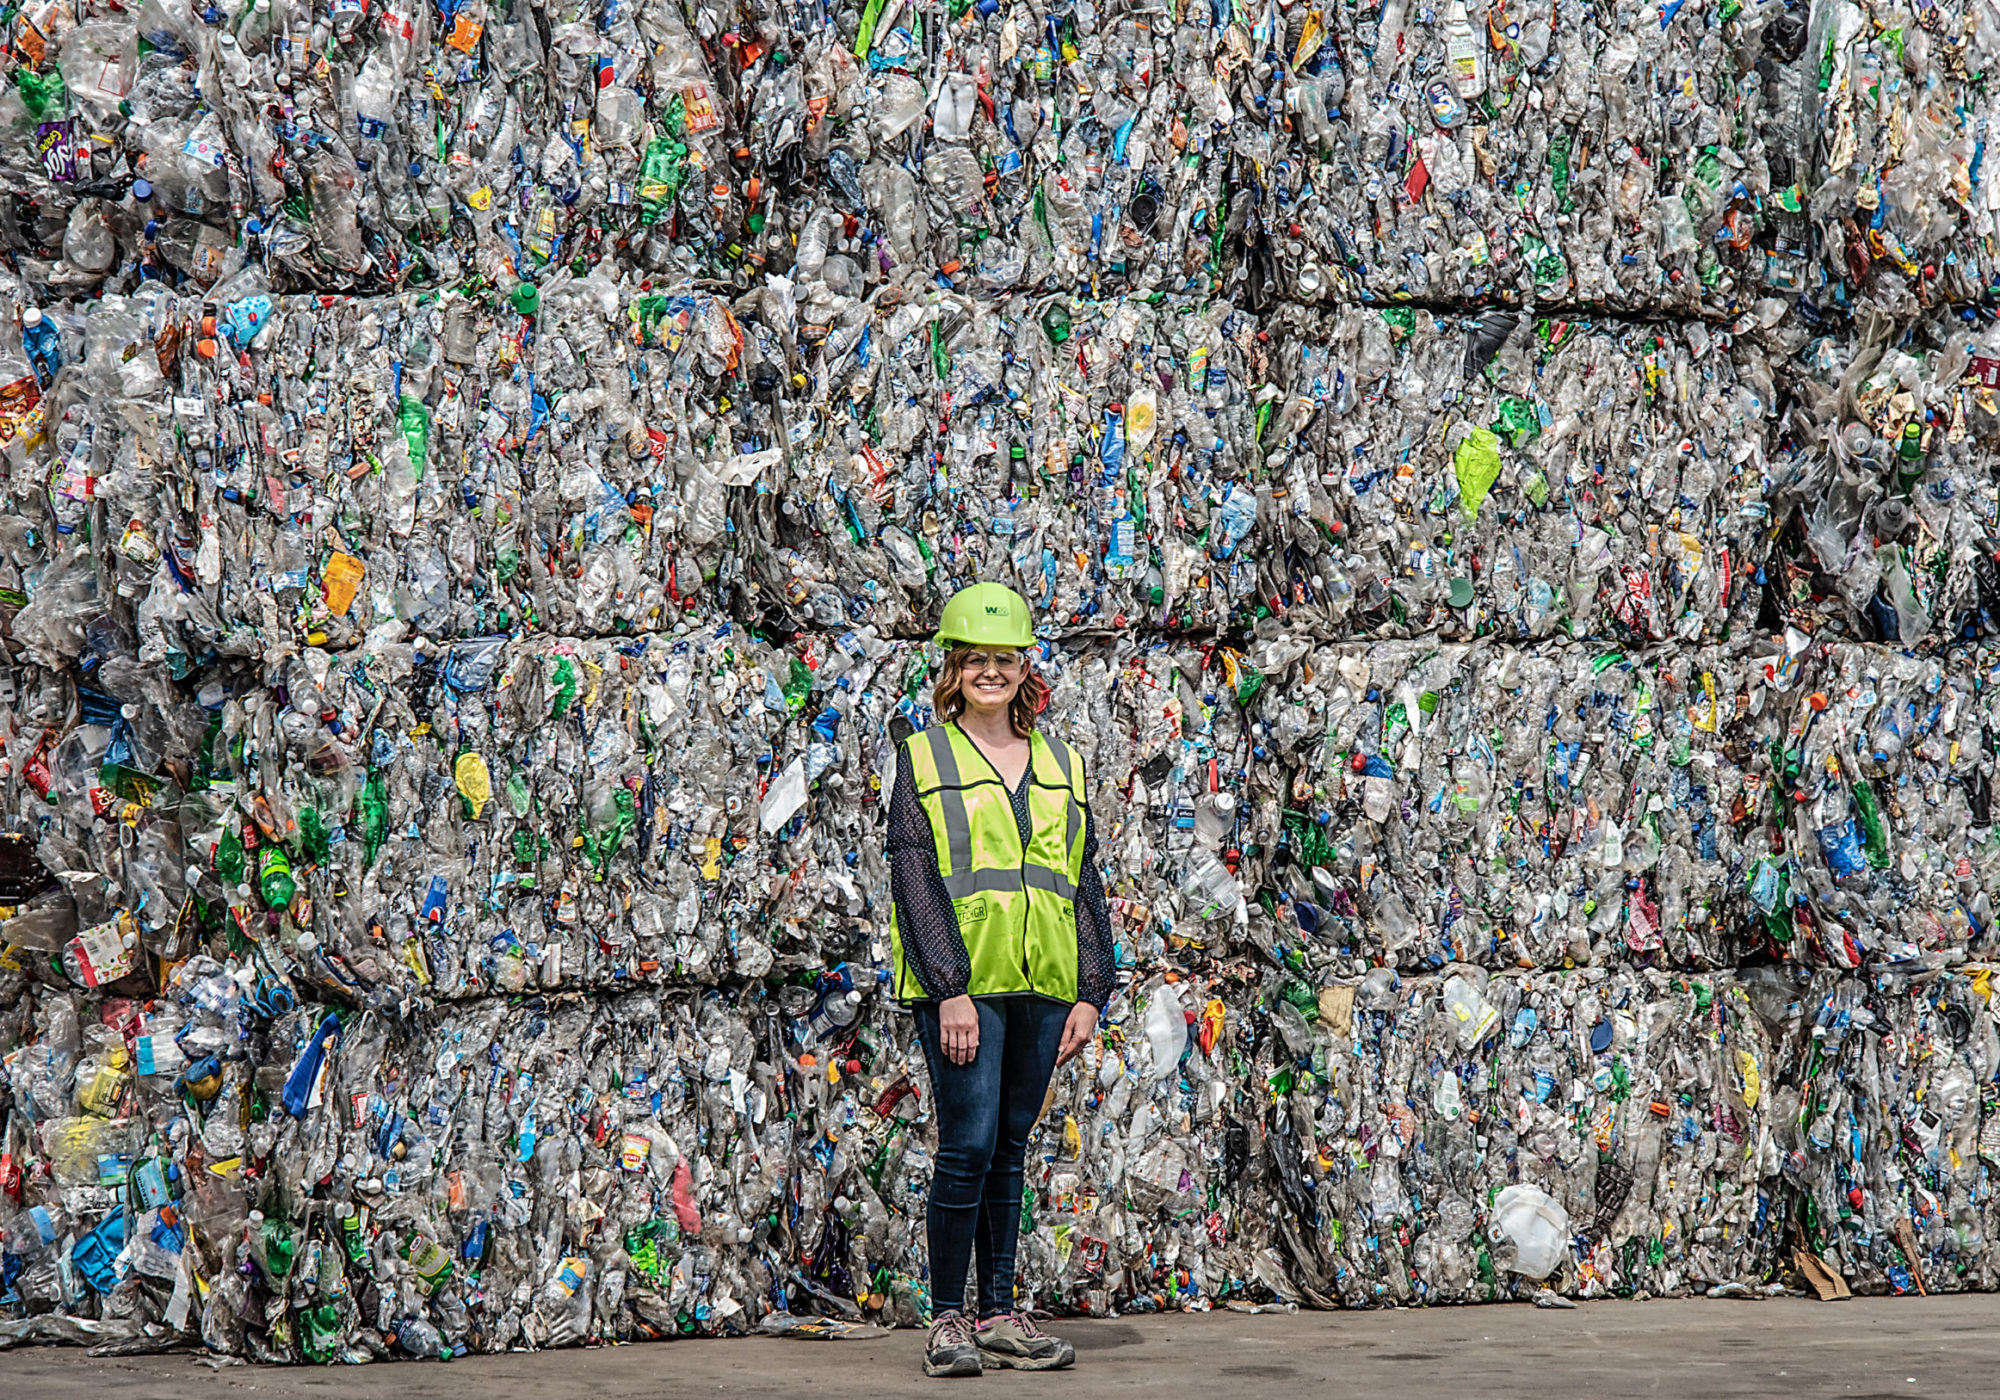 Erika Deyarmin-Young, spokesperson for Waste Management, stands with bales of plastic garbage at Greenstar Recycling on Neville Island in the Ohio river, around 20 miles south of Shell’s cracker plant. CREDIT: Teake Zuidema/Nexus Media News